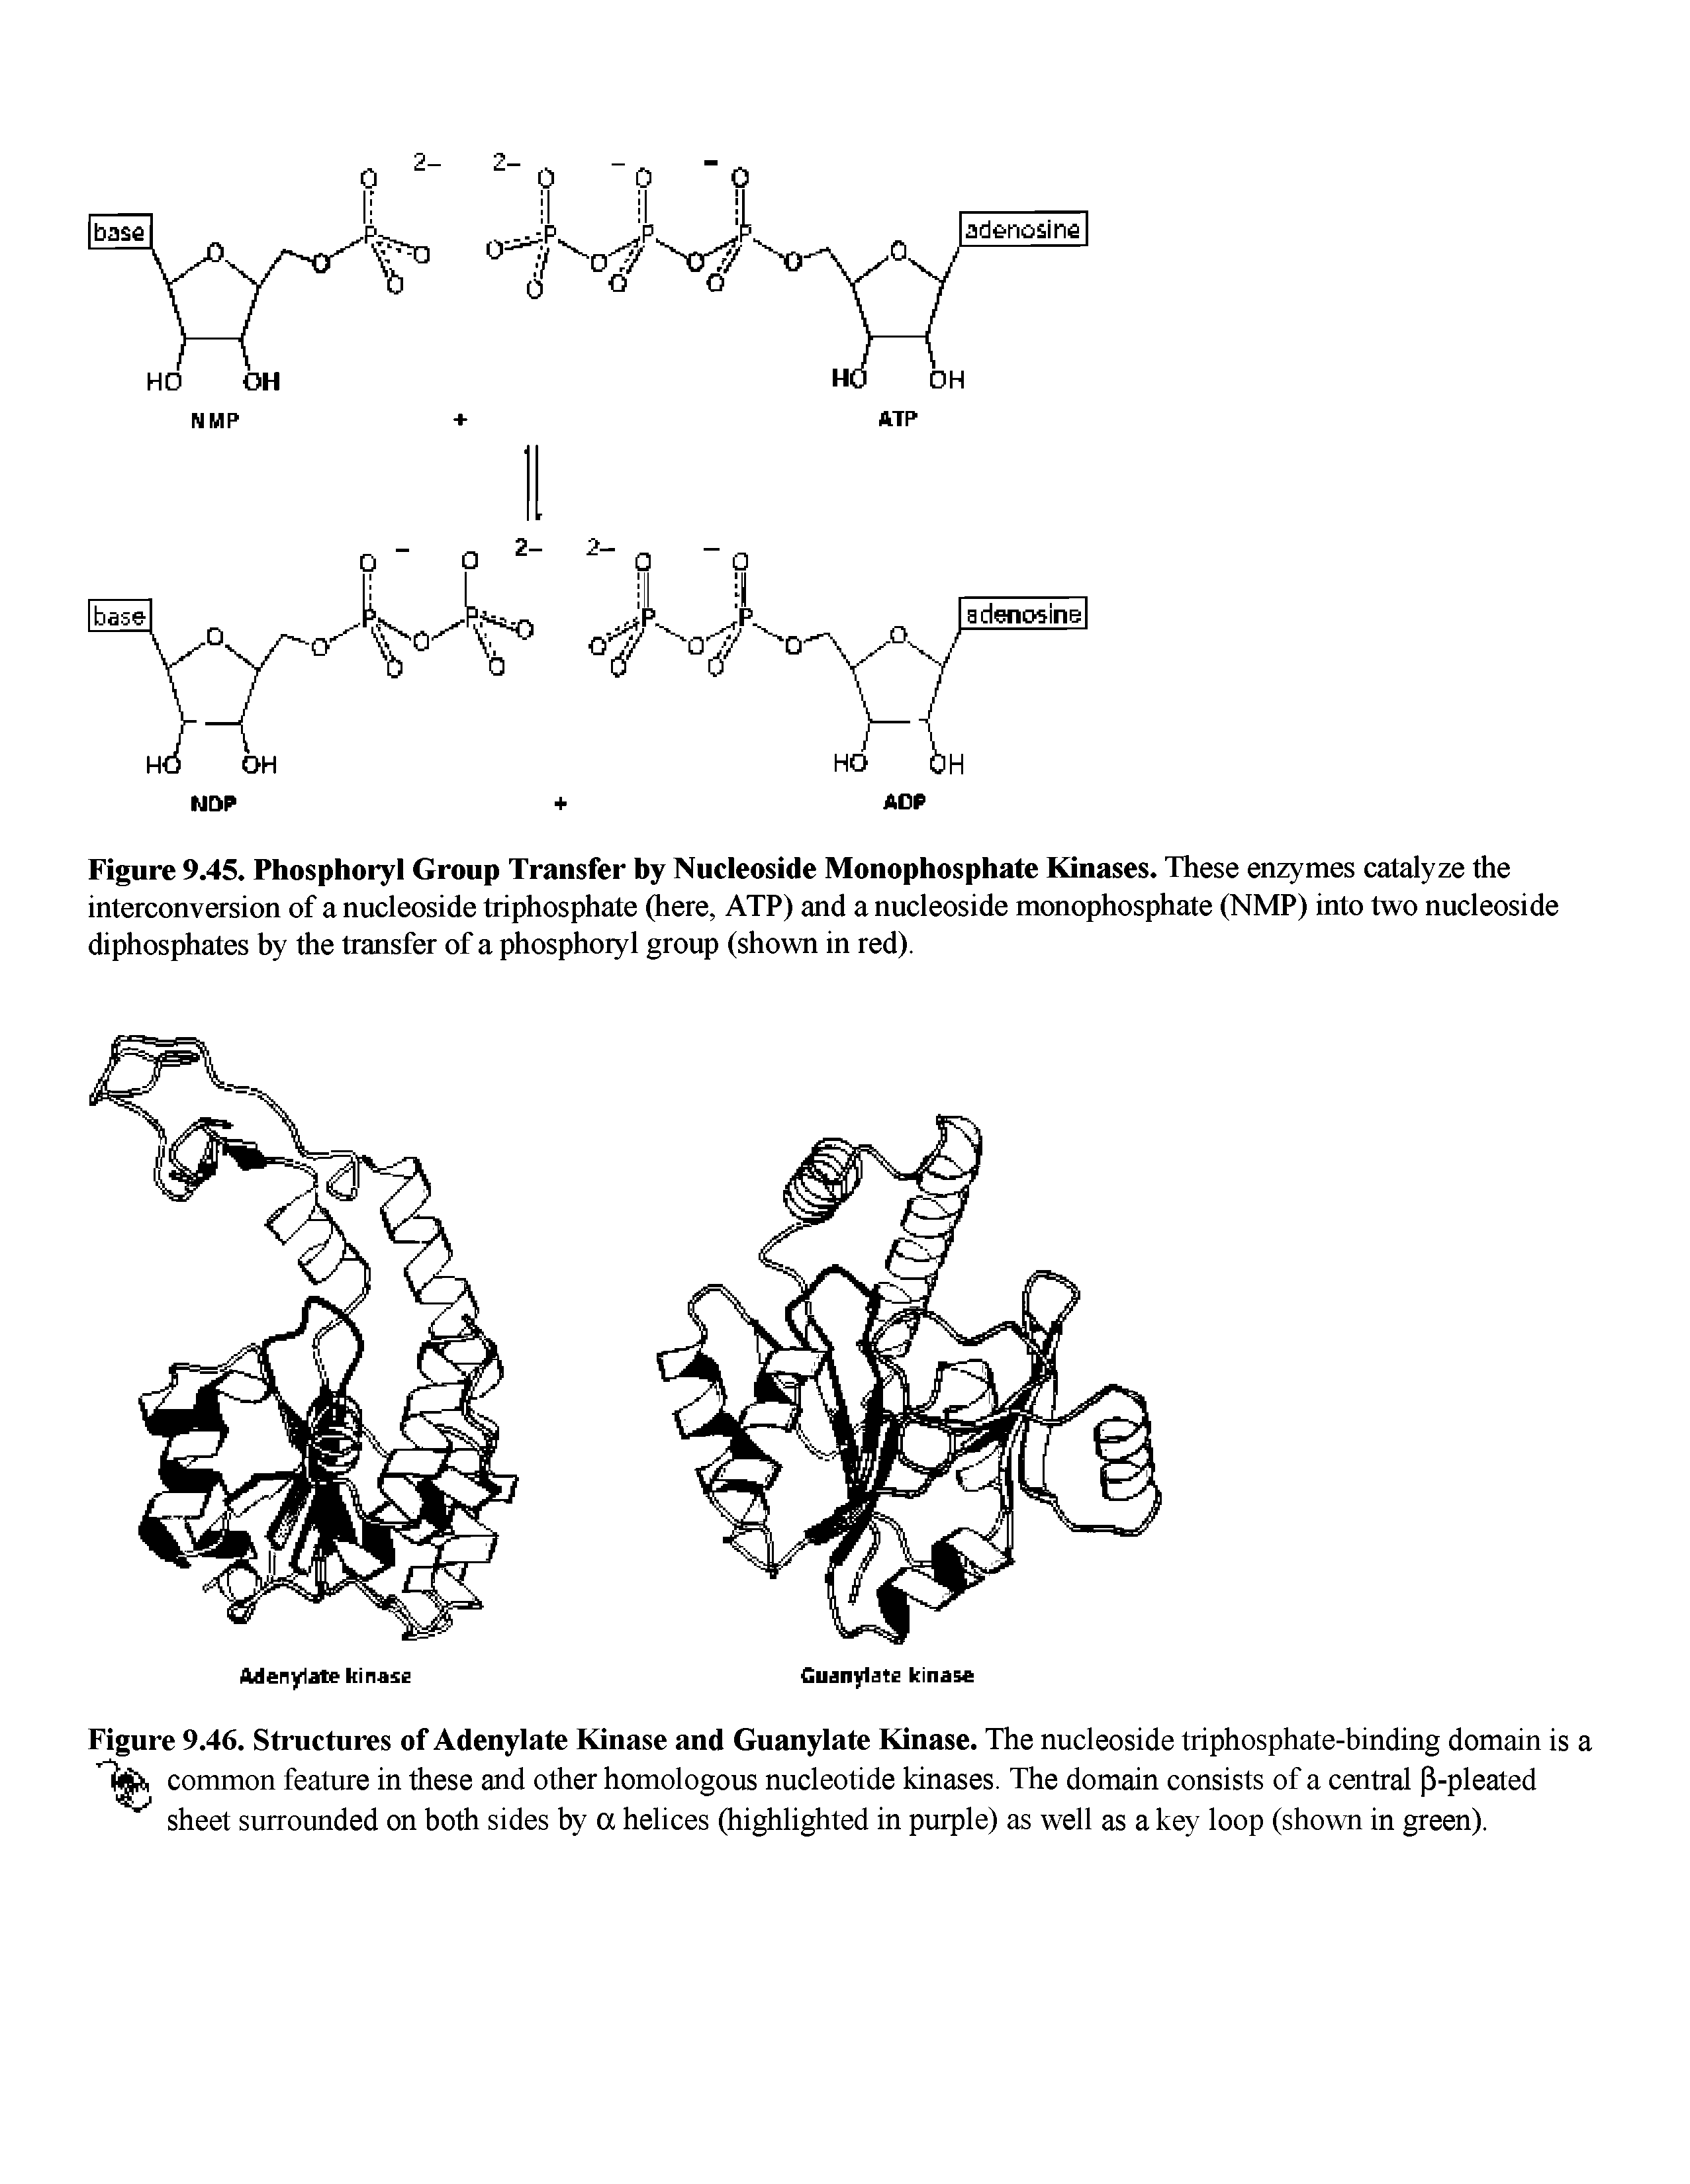 Figure 9.45. Phosphoryl Group Transfer by Nucleoside Monophosphate Kinases. These enzymes catalyze the interconversion of a nucleoside triphosphate (here, ATP) and a nucleoside monophosphate (NMP) into two nucleoside diphosphates by the transfer of a phosphoryl group (shown in red).